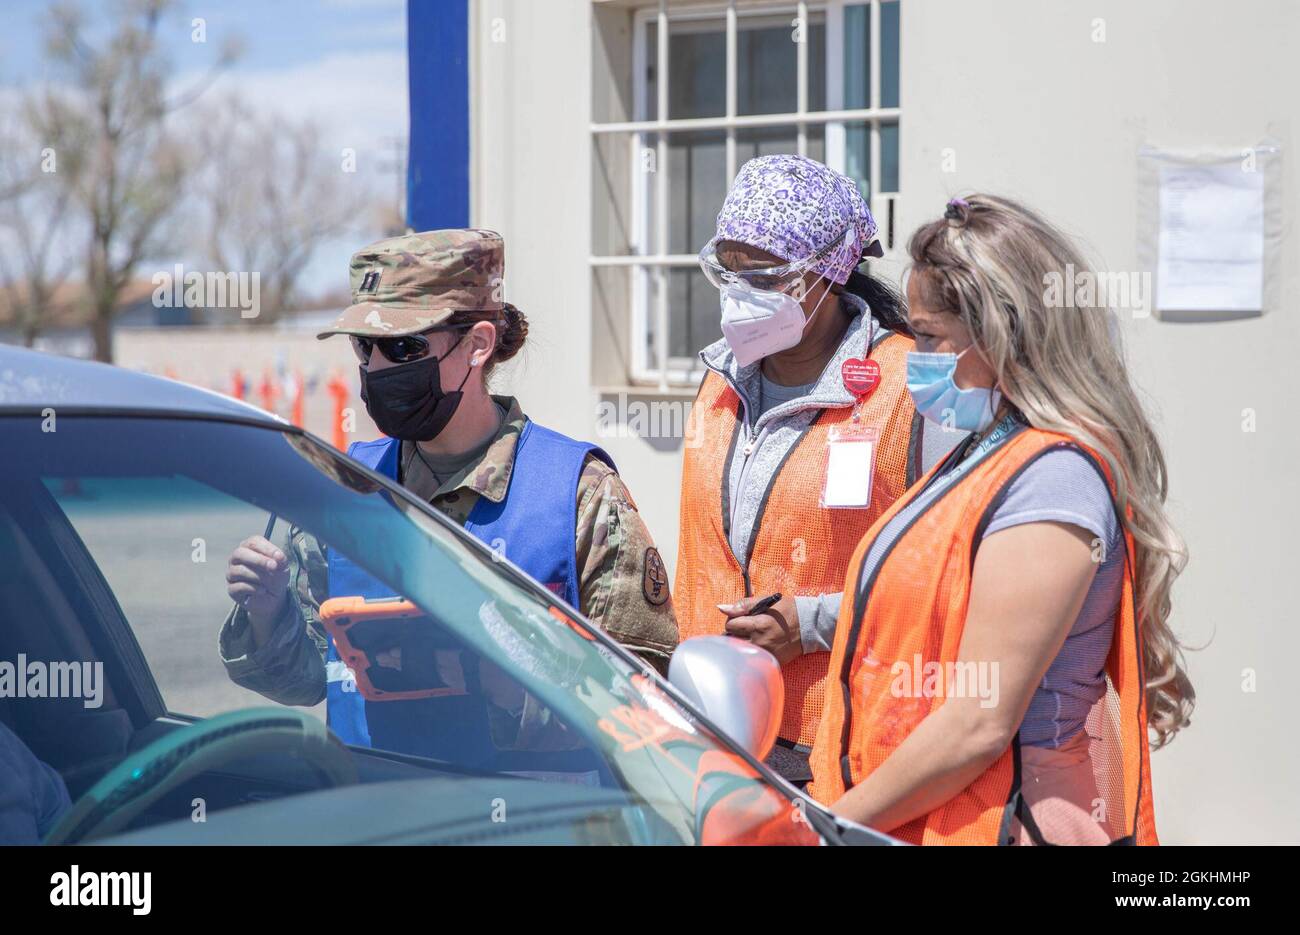 U.S. Army Capt. Meredith Myatt, left, a registered nurse assigned to Andrew Rader Health Clinic, and Carol Abbott, middle, a civilian registered nurse, speak with a member of the Pueblo community while Louisa Carlos, right, a Spanish translator with the Federal Emergency Management Agency (FEMA), translates at the Community Vaccination Center at the Colorado State Fairgrounds in Pueblo, Colorado, April 25, 2021. The Soldiers at the Pueblo Community vaccination site work side by side with their civilian counterparts to help community members. U.S. Northern Command, through U.S. Army North, rema Stock Photo